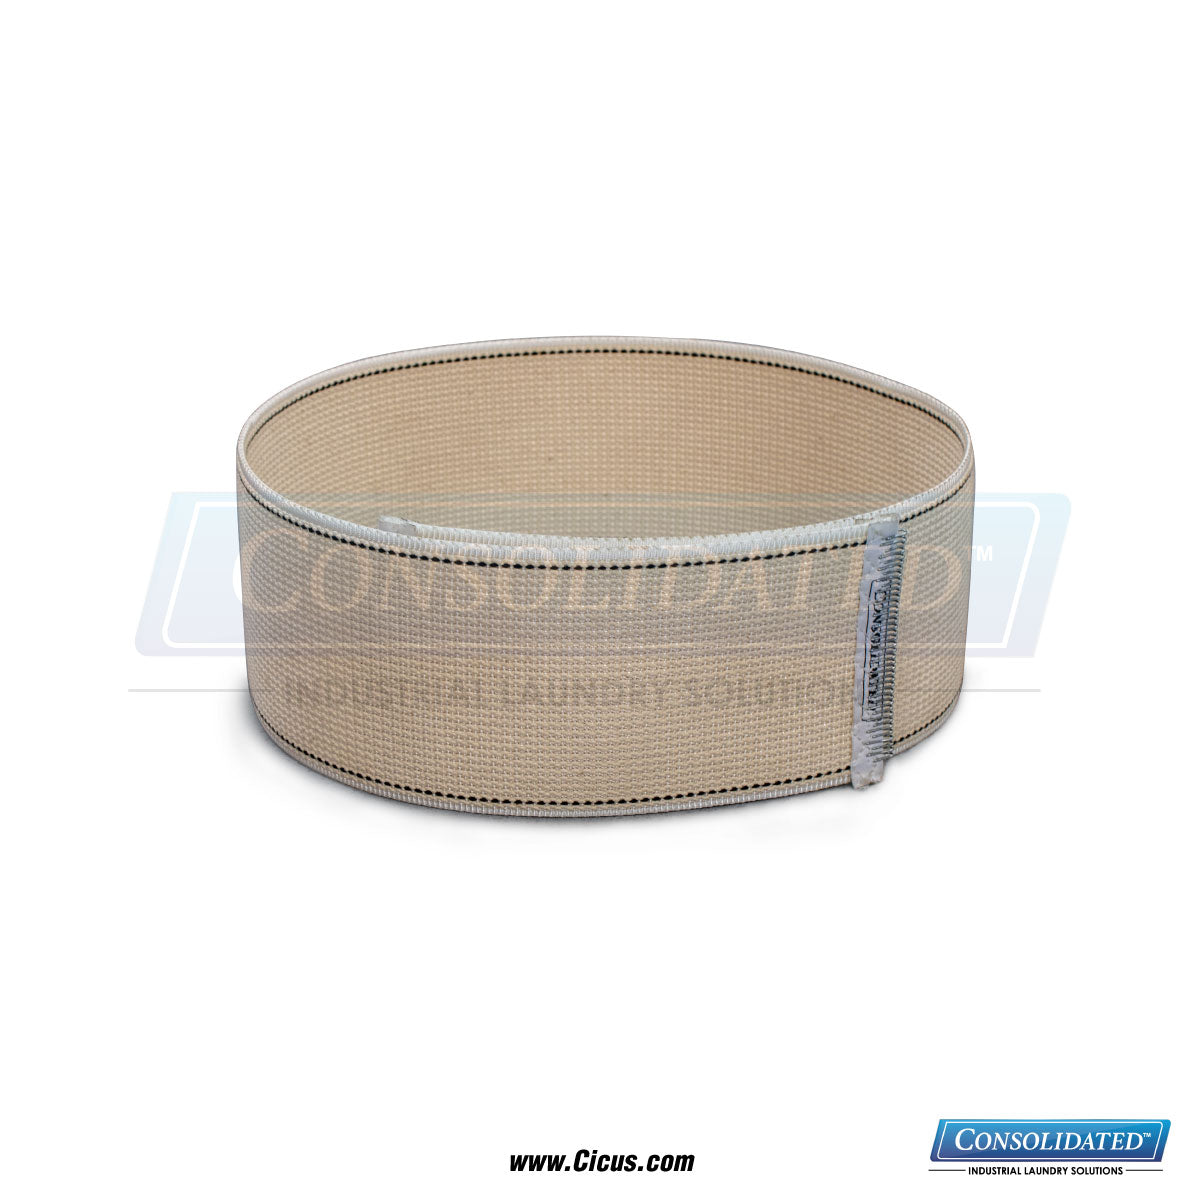 CICUS Chicago Dryer Canvas Ribbon - 2" x 120" - Chicago Dryer Compatible [1001-053]